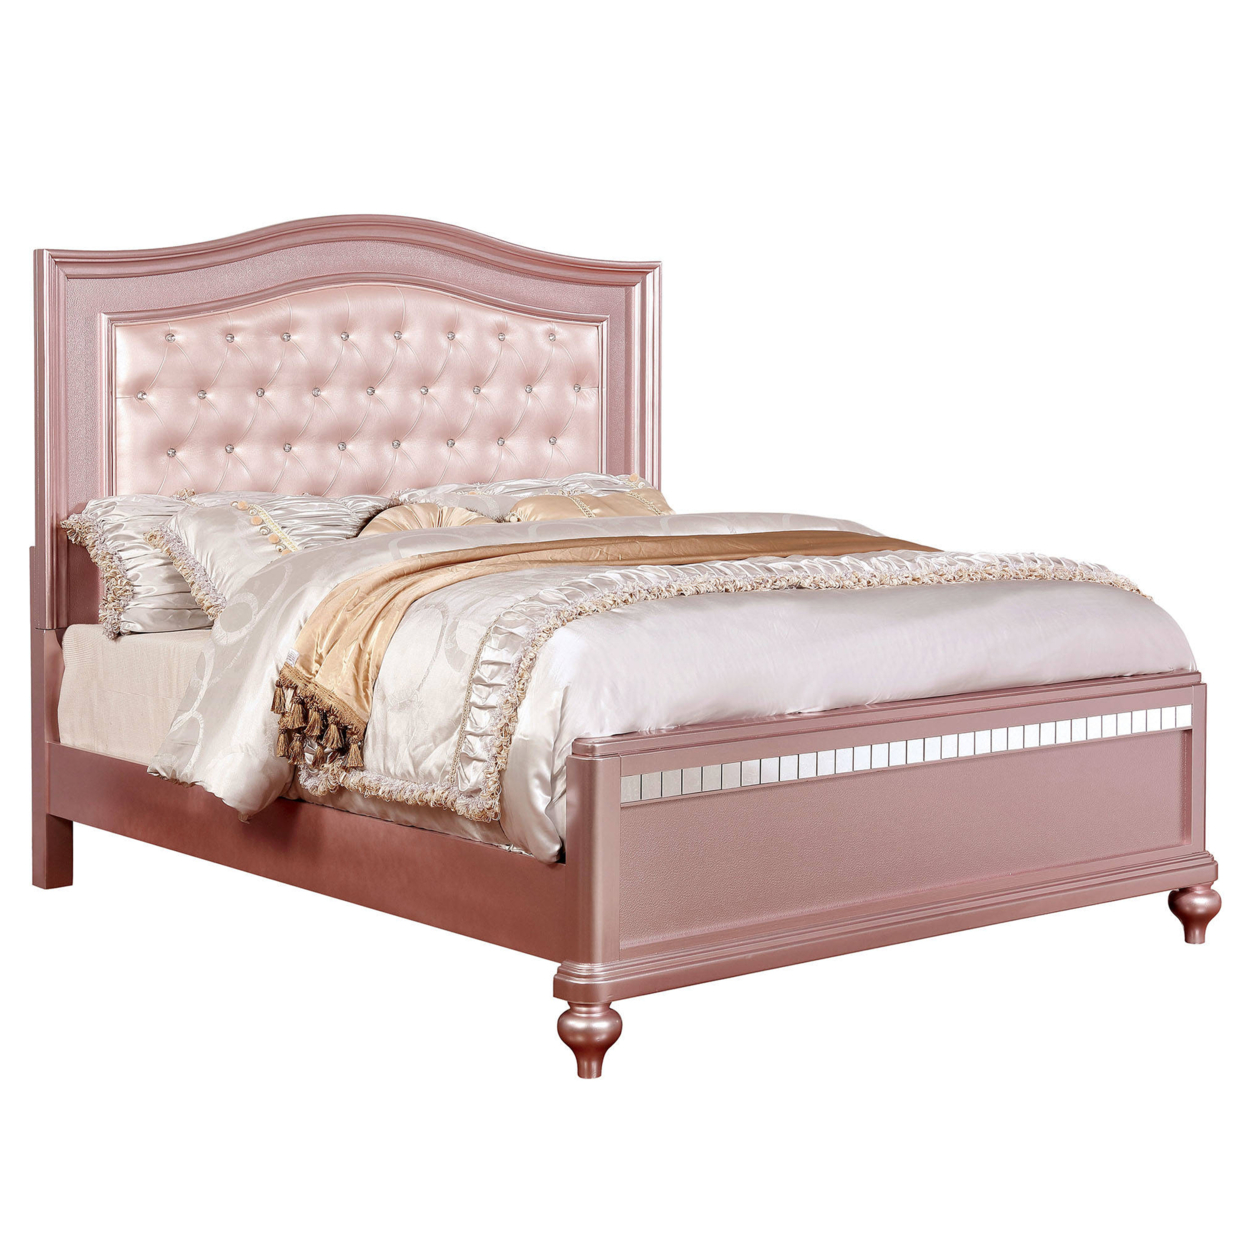 Twin Size Wooden Bed With Mirror Trim Details And Camelback Headboard, Pink- Saltoro Sherpi